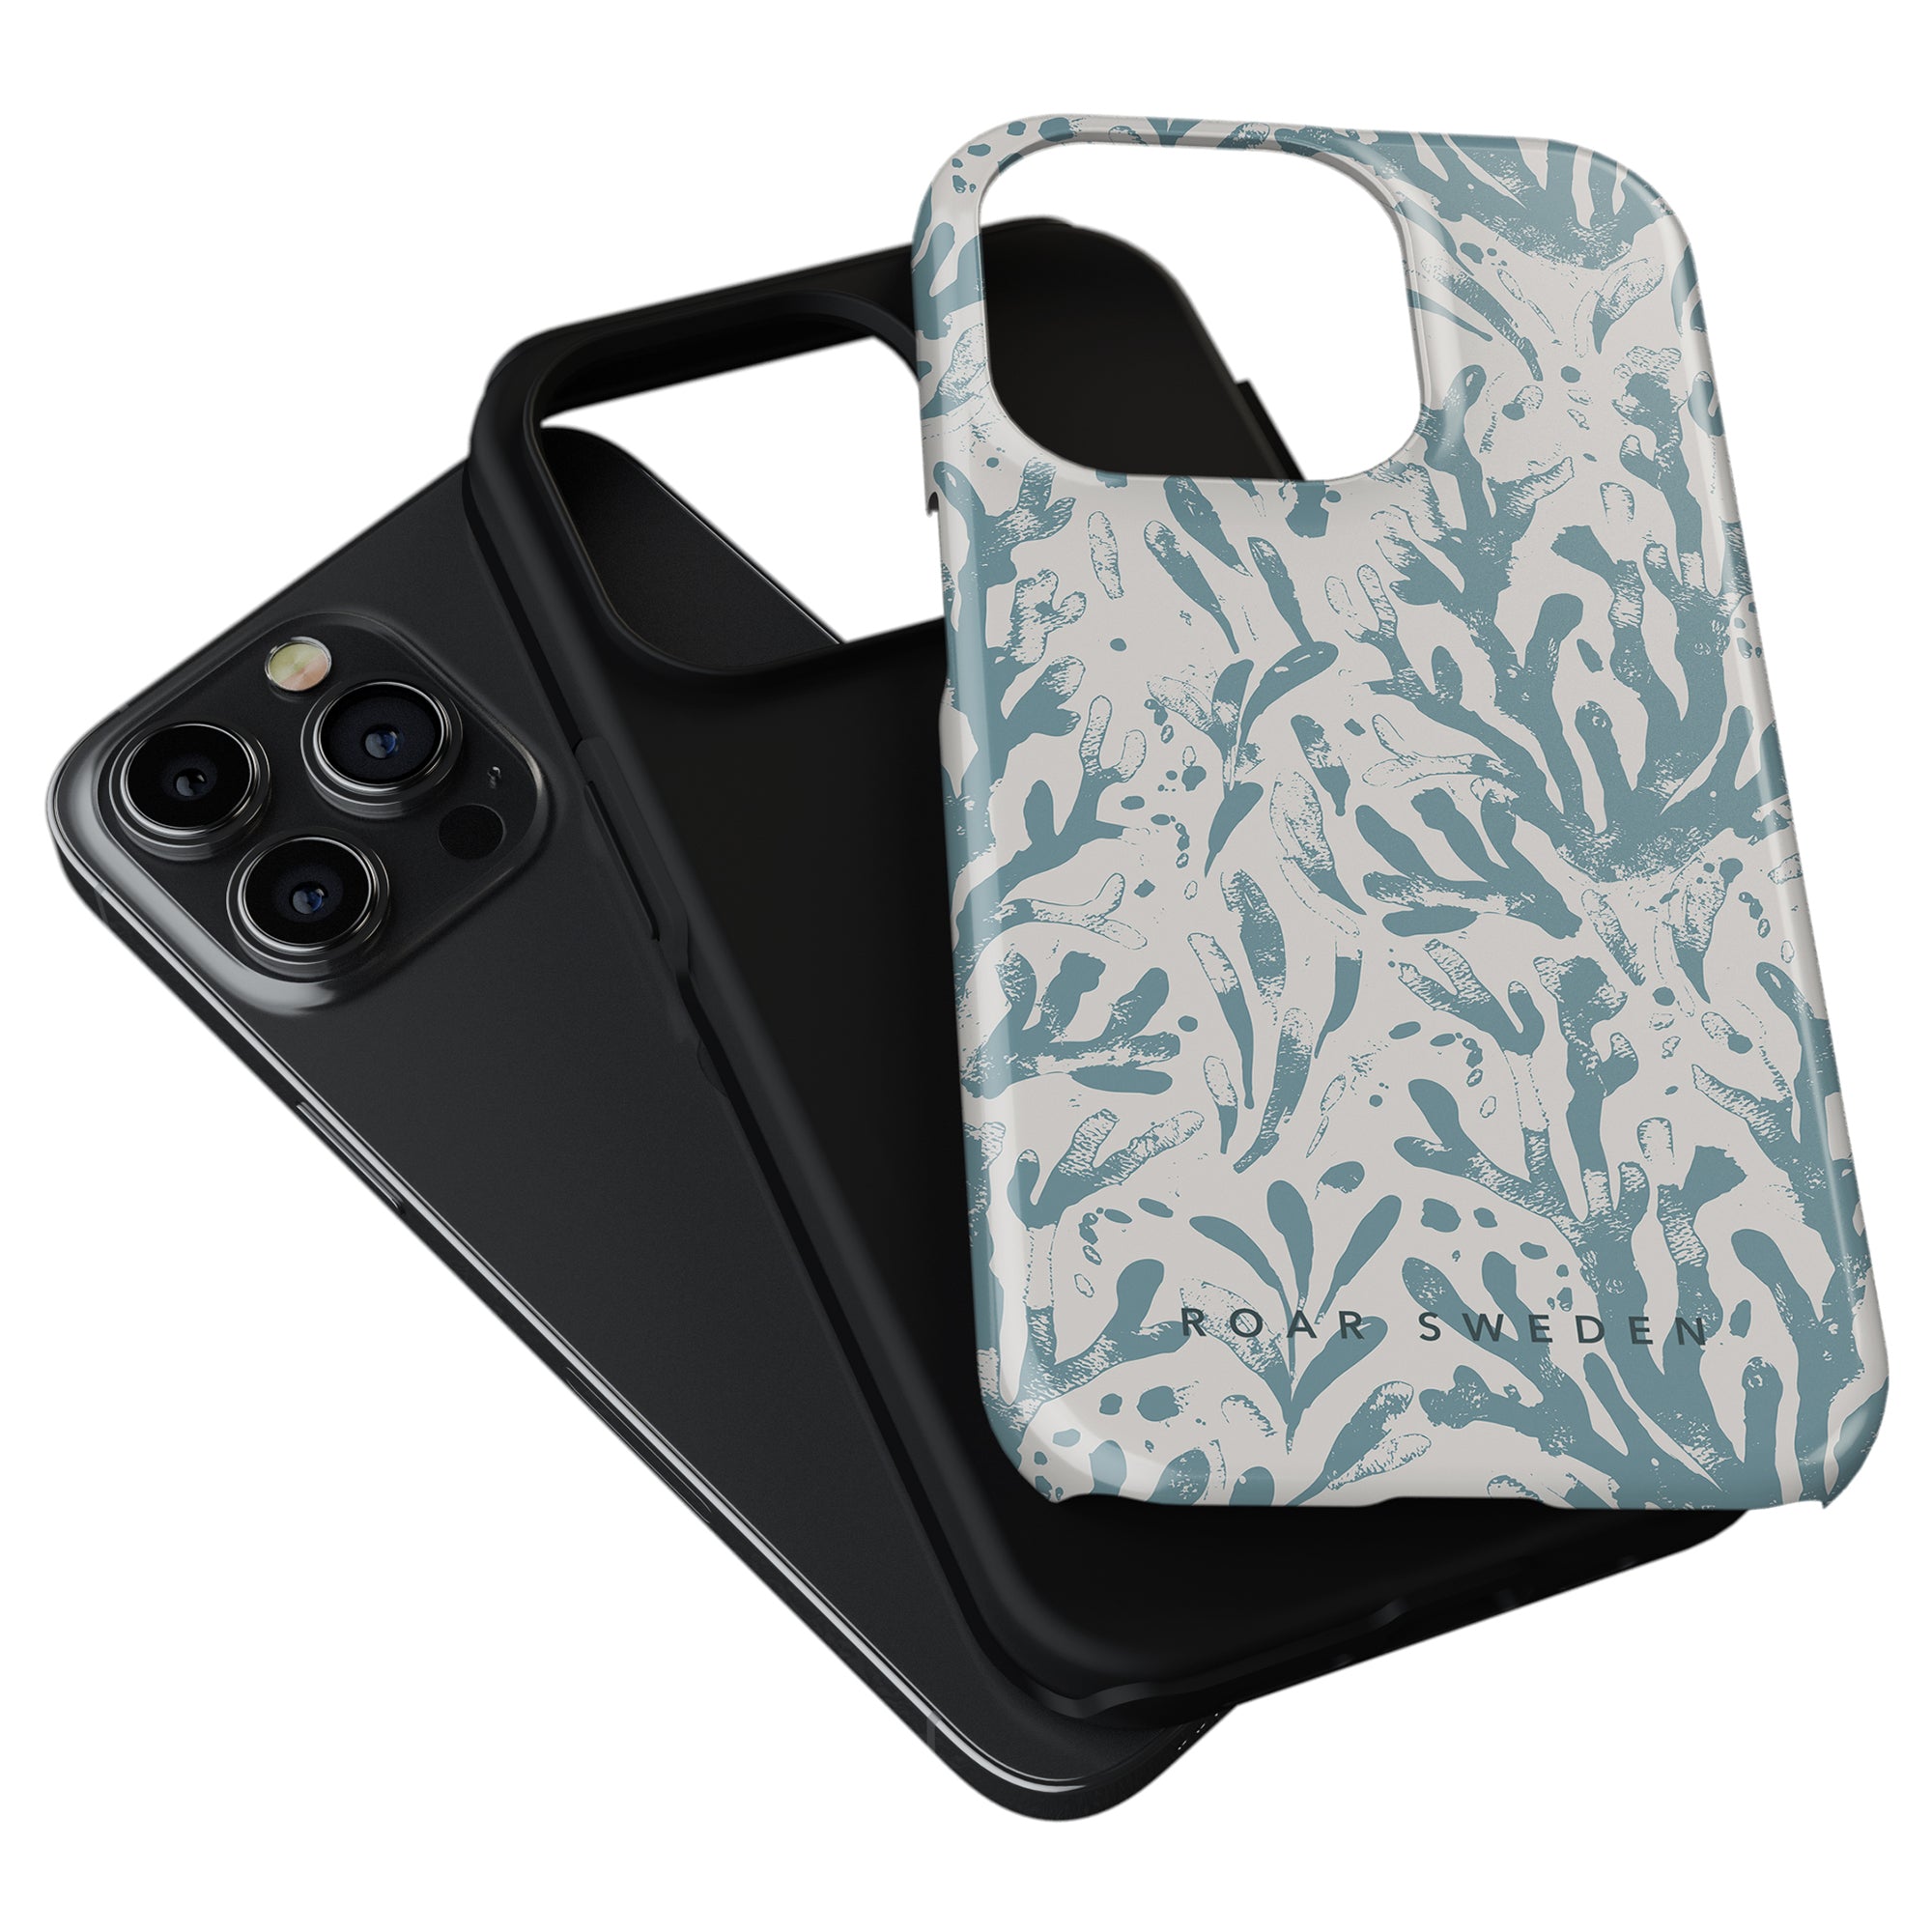 A black smartphone with a triple-camera system next to a Sea Life - Tough Case featuring a blue and white abstract pattern.